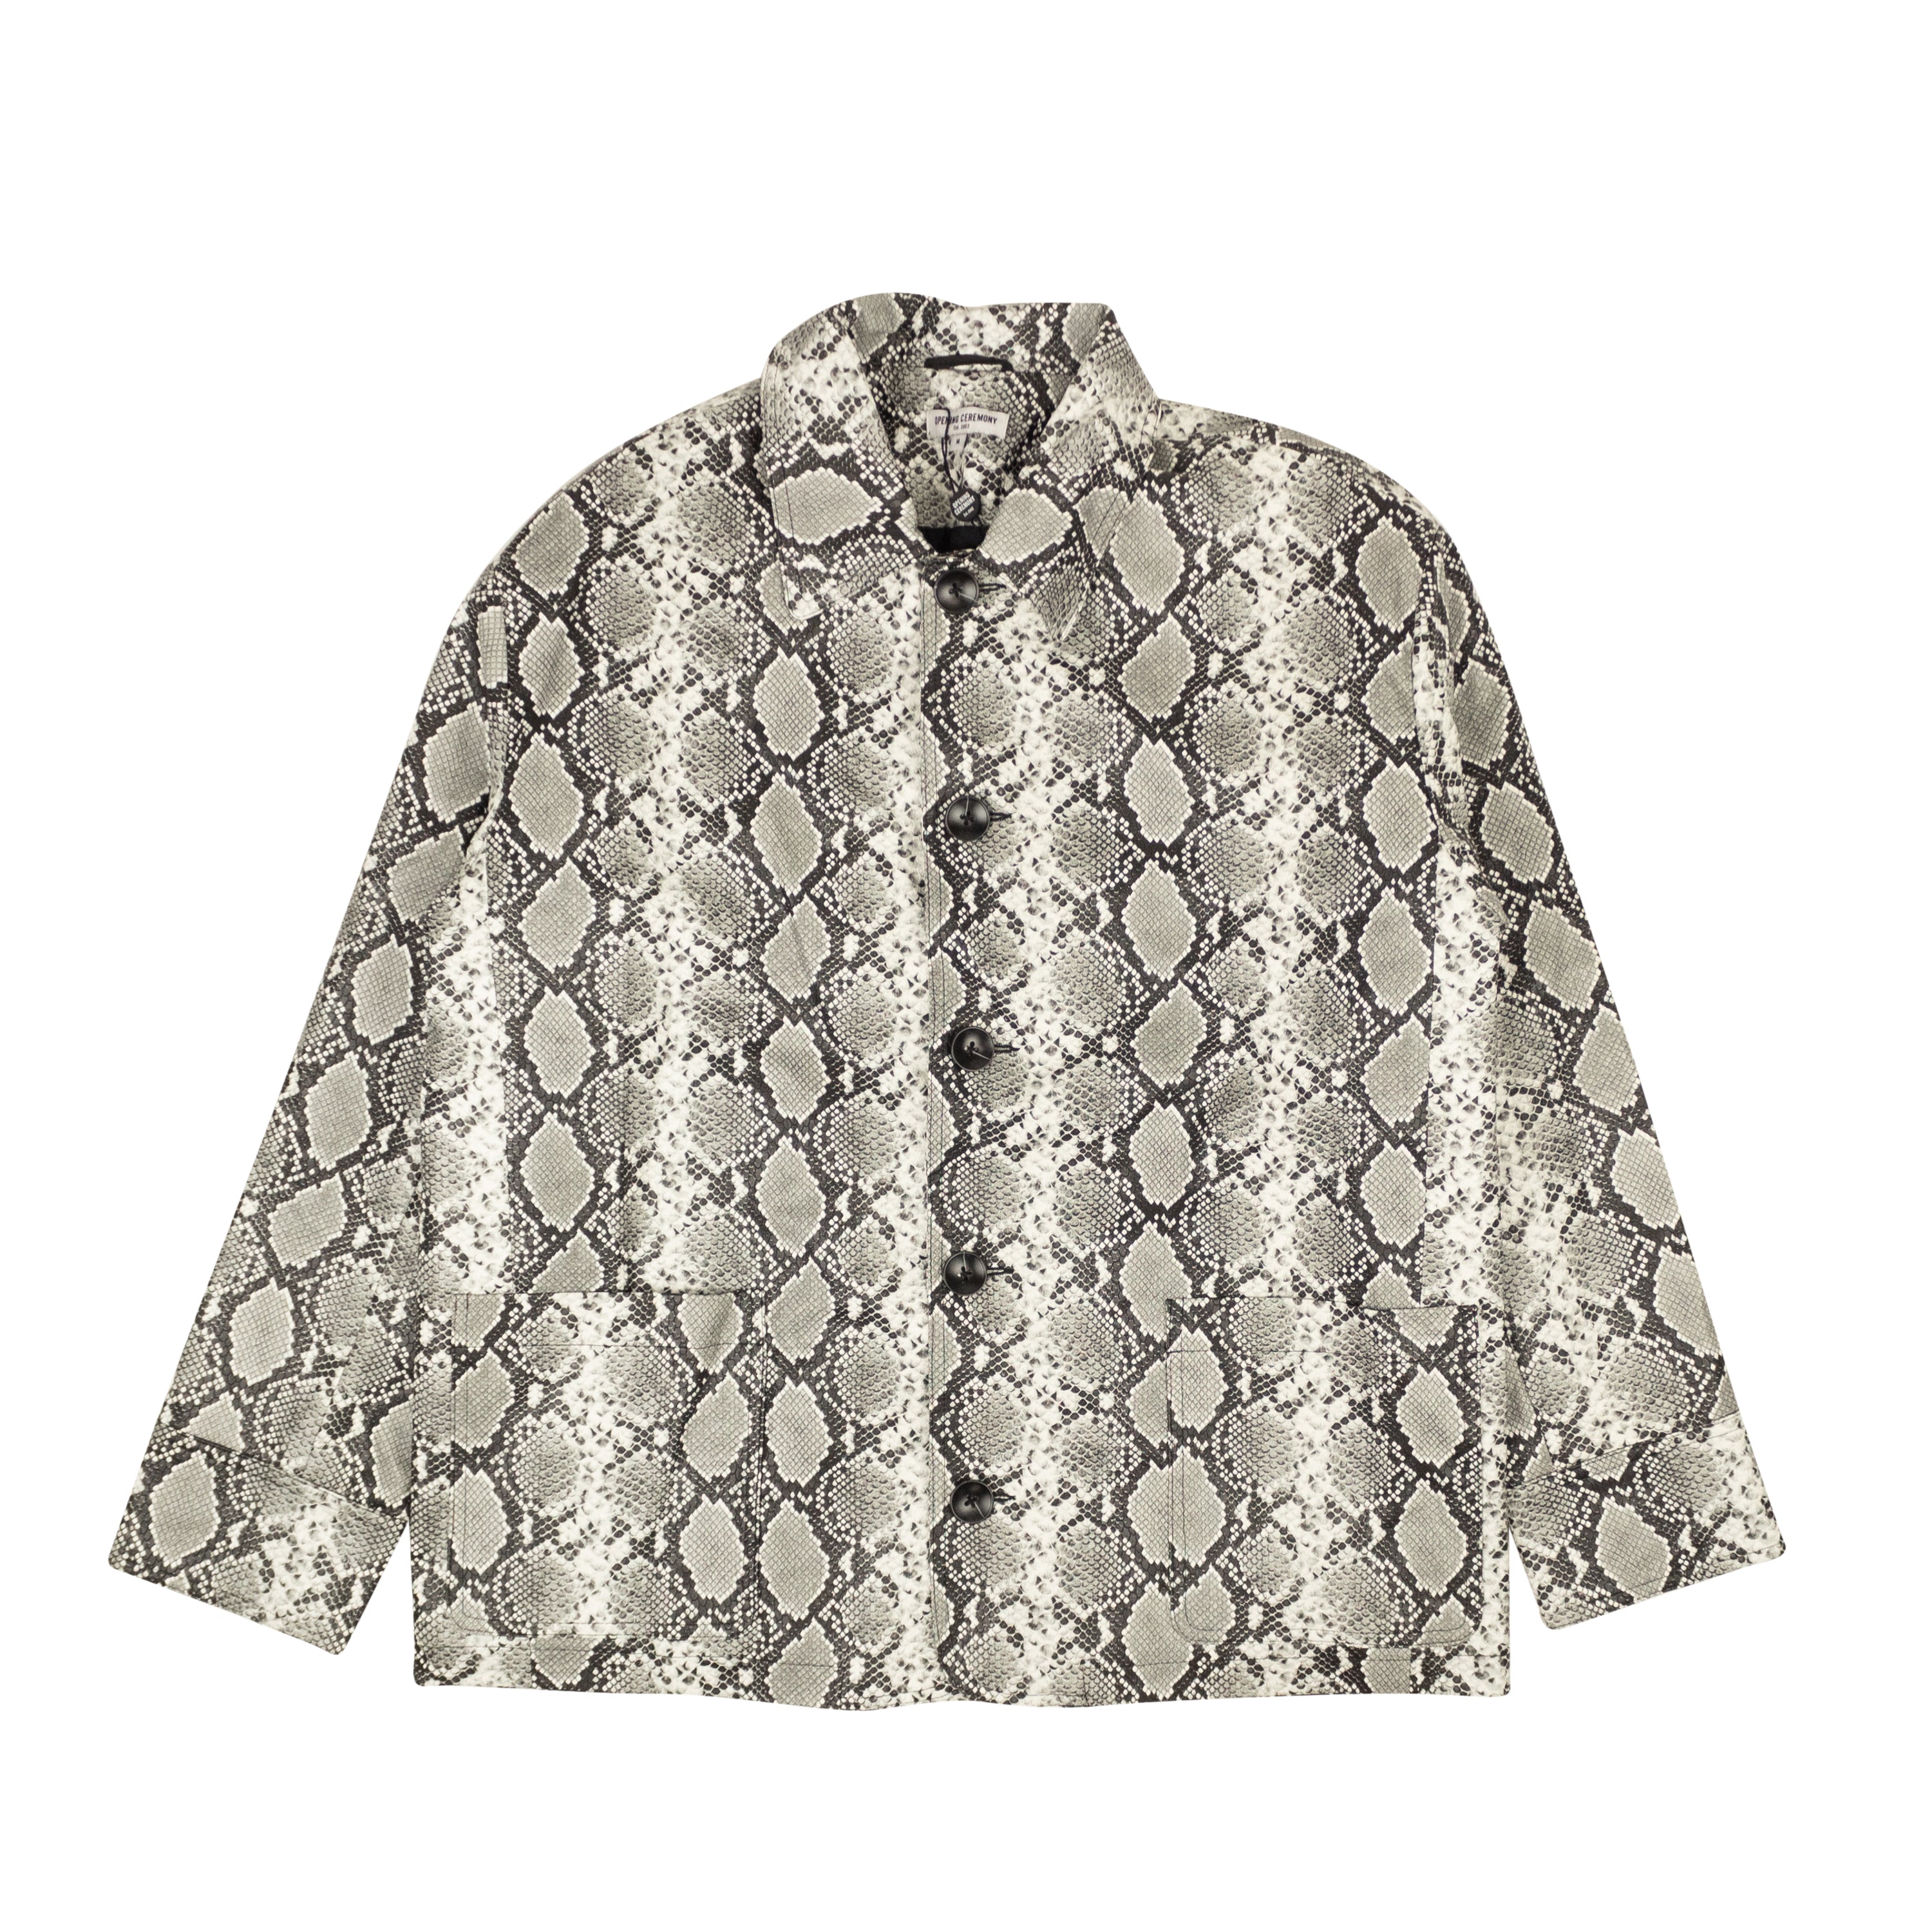 Opening Ceremony Faux Snake Jacket - Black/white In Gray